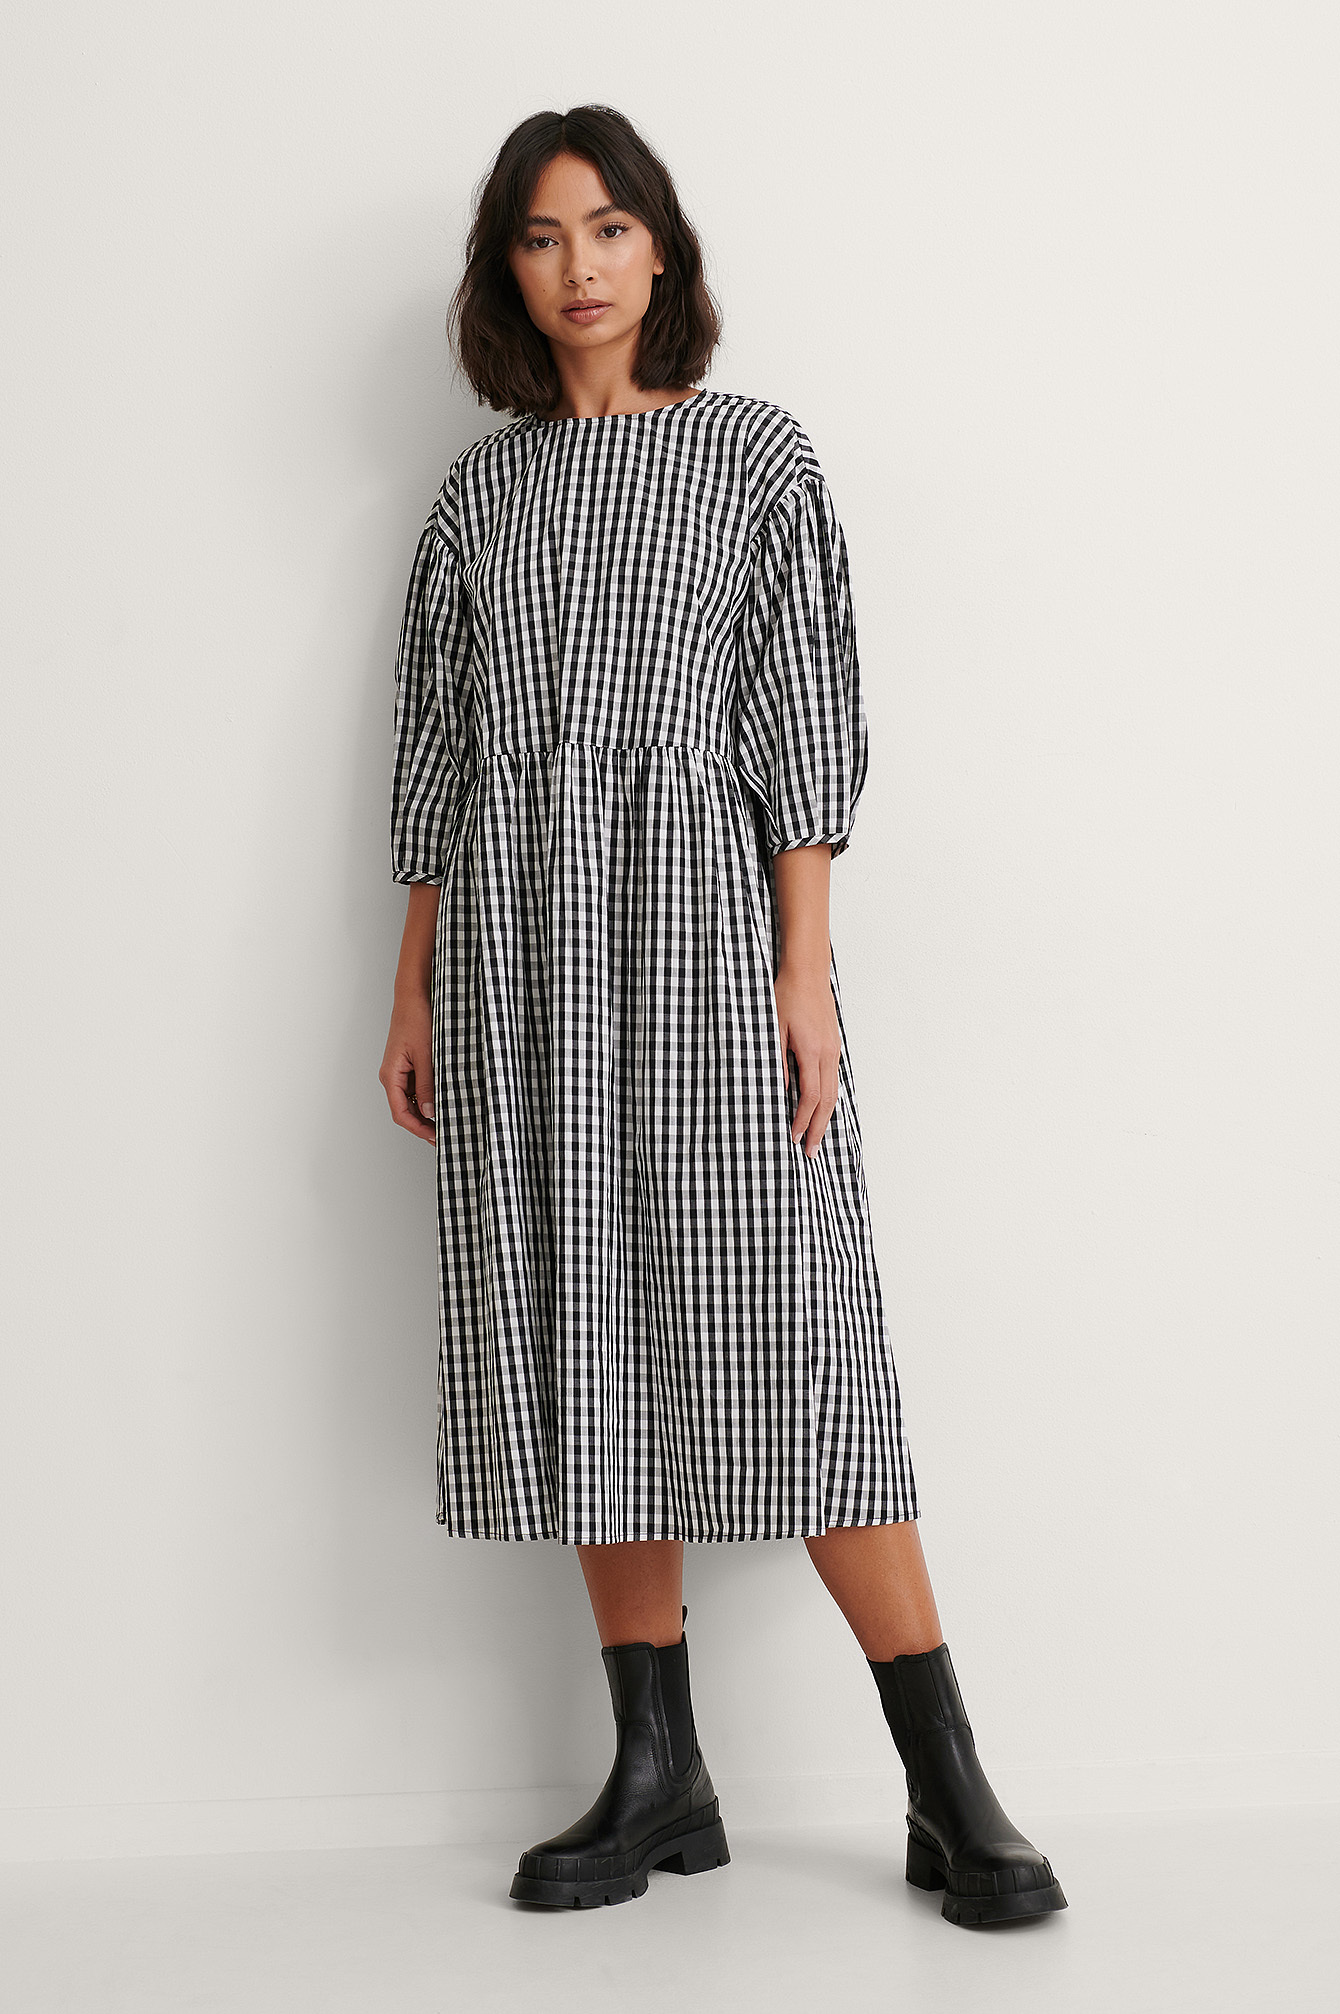 Round Neck Oversized Dress Outfit!